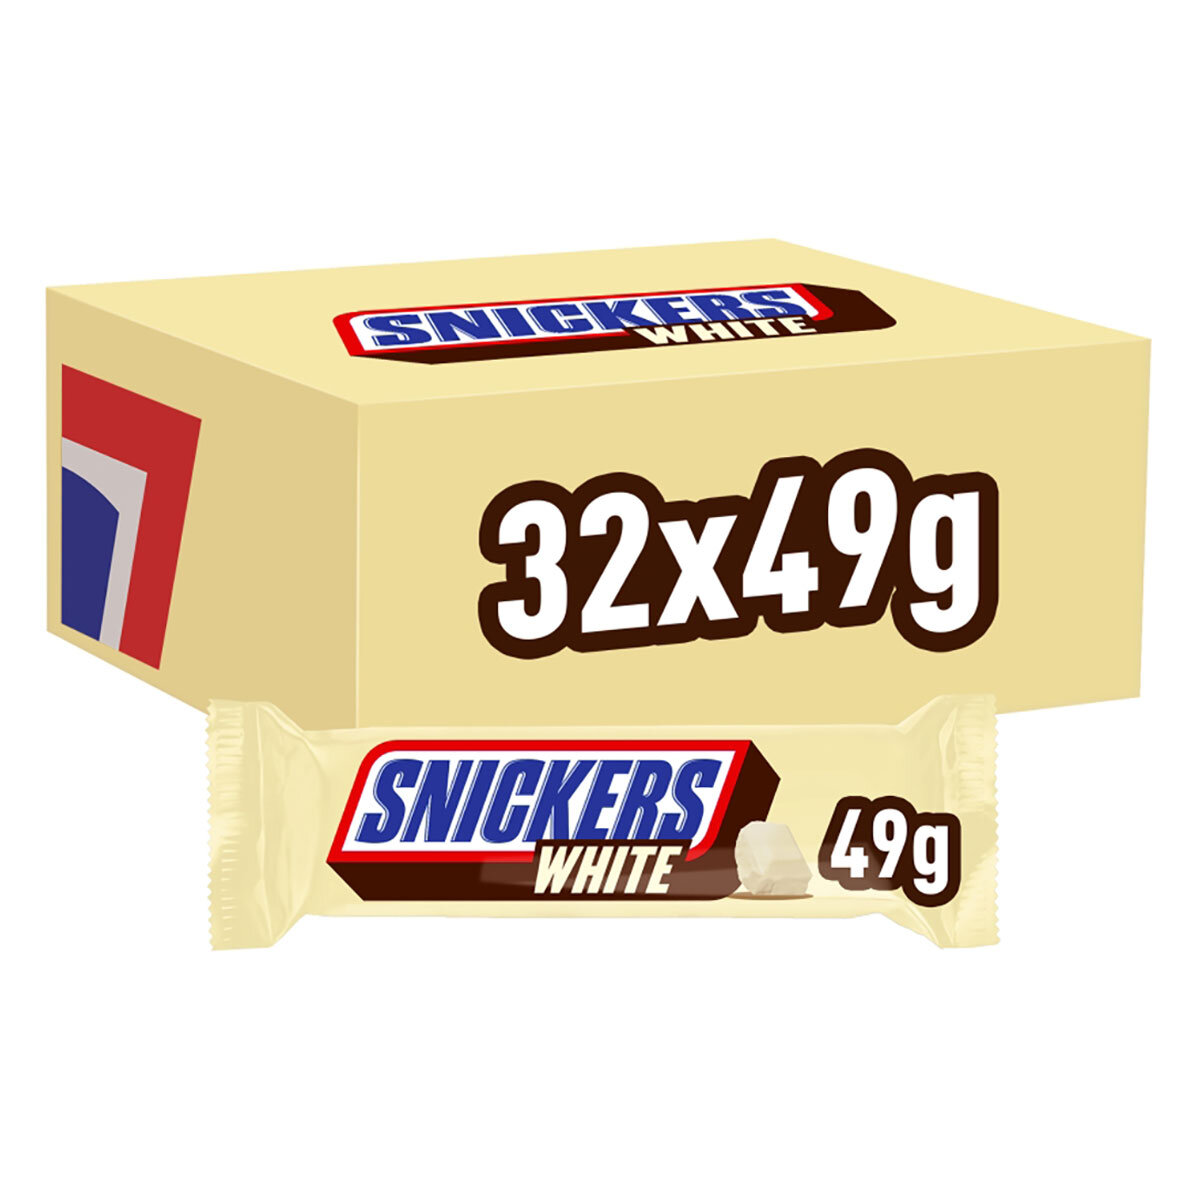 Snickers White, 32 x 49g